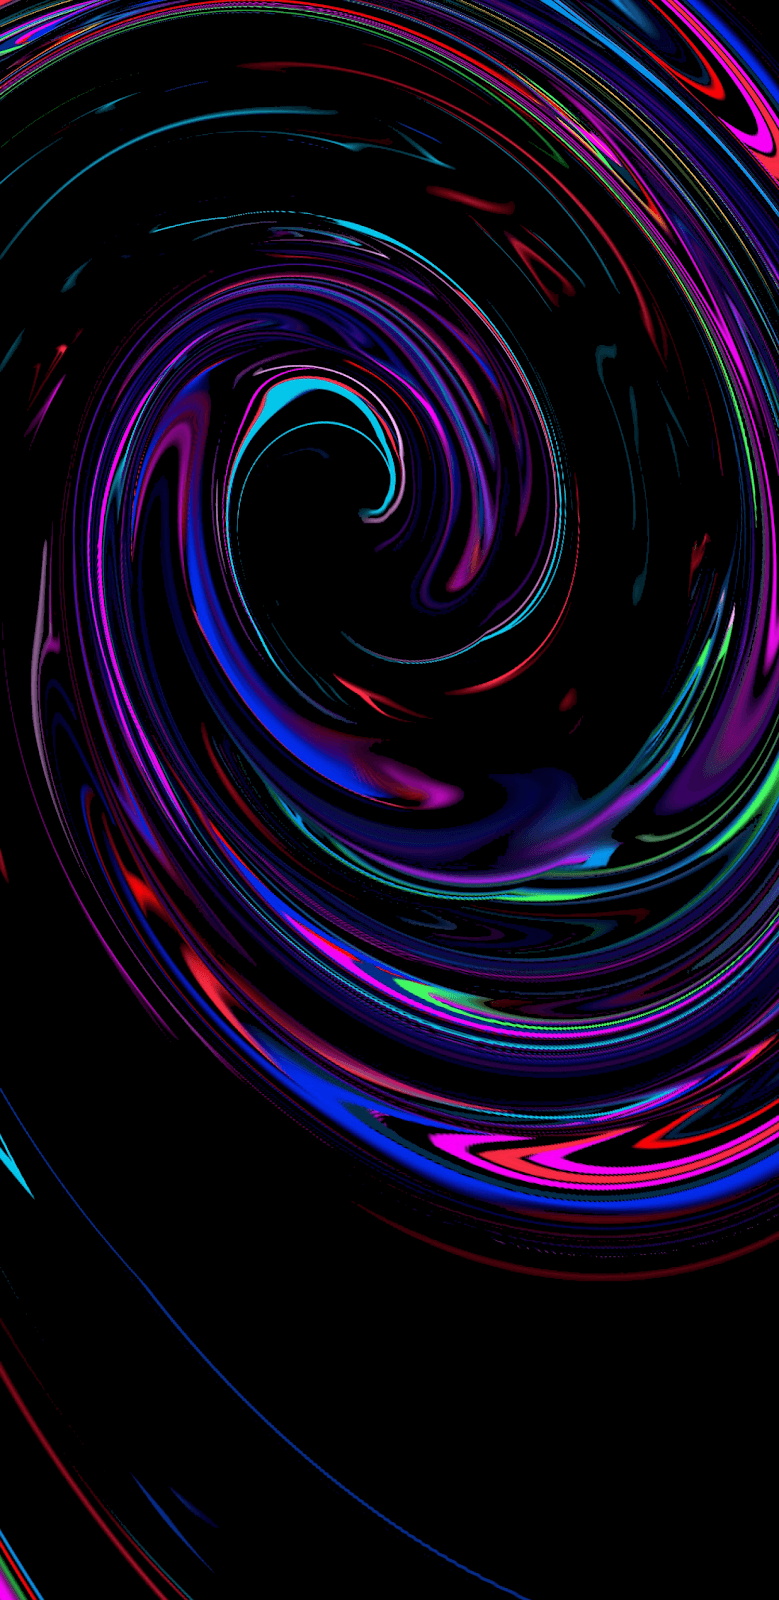 Infinity (for Amoled display) #wallpaper #iphone #android. Dark